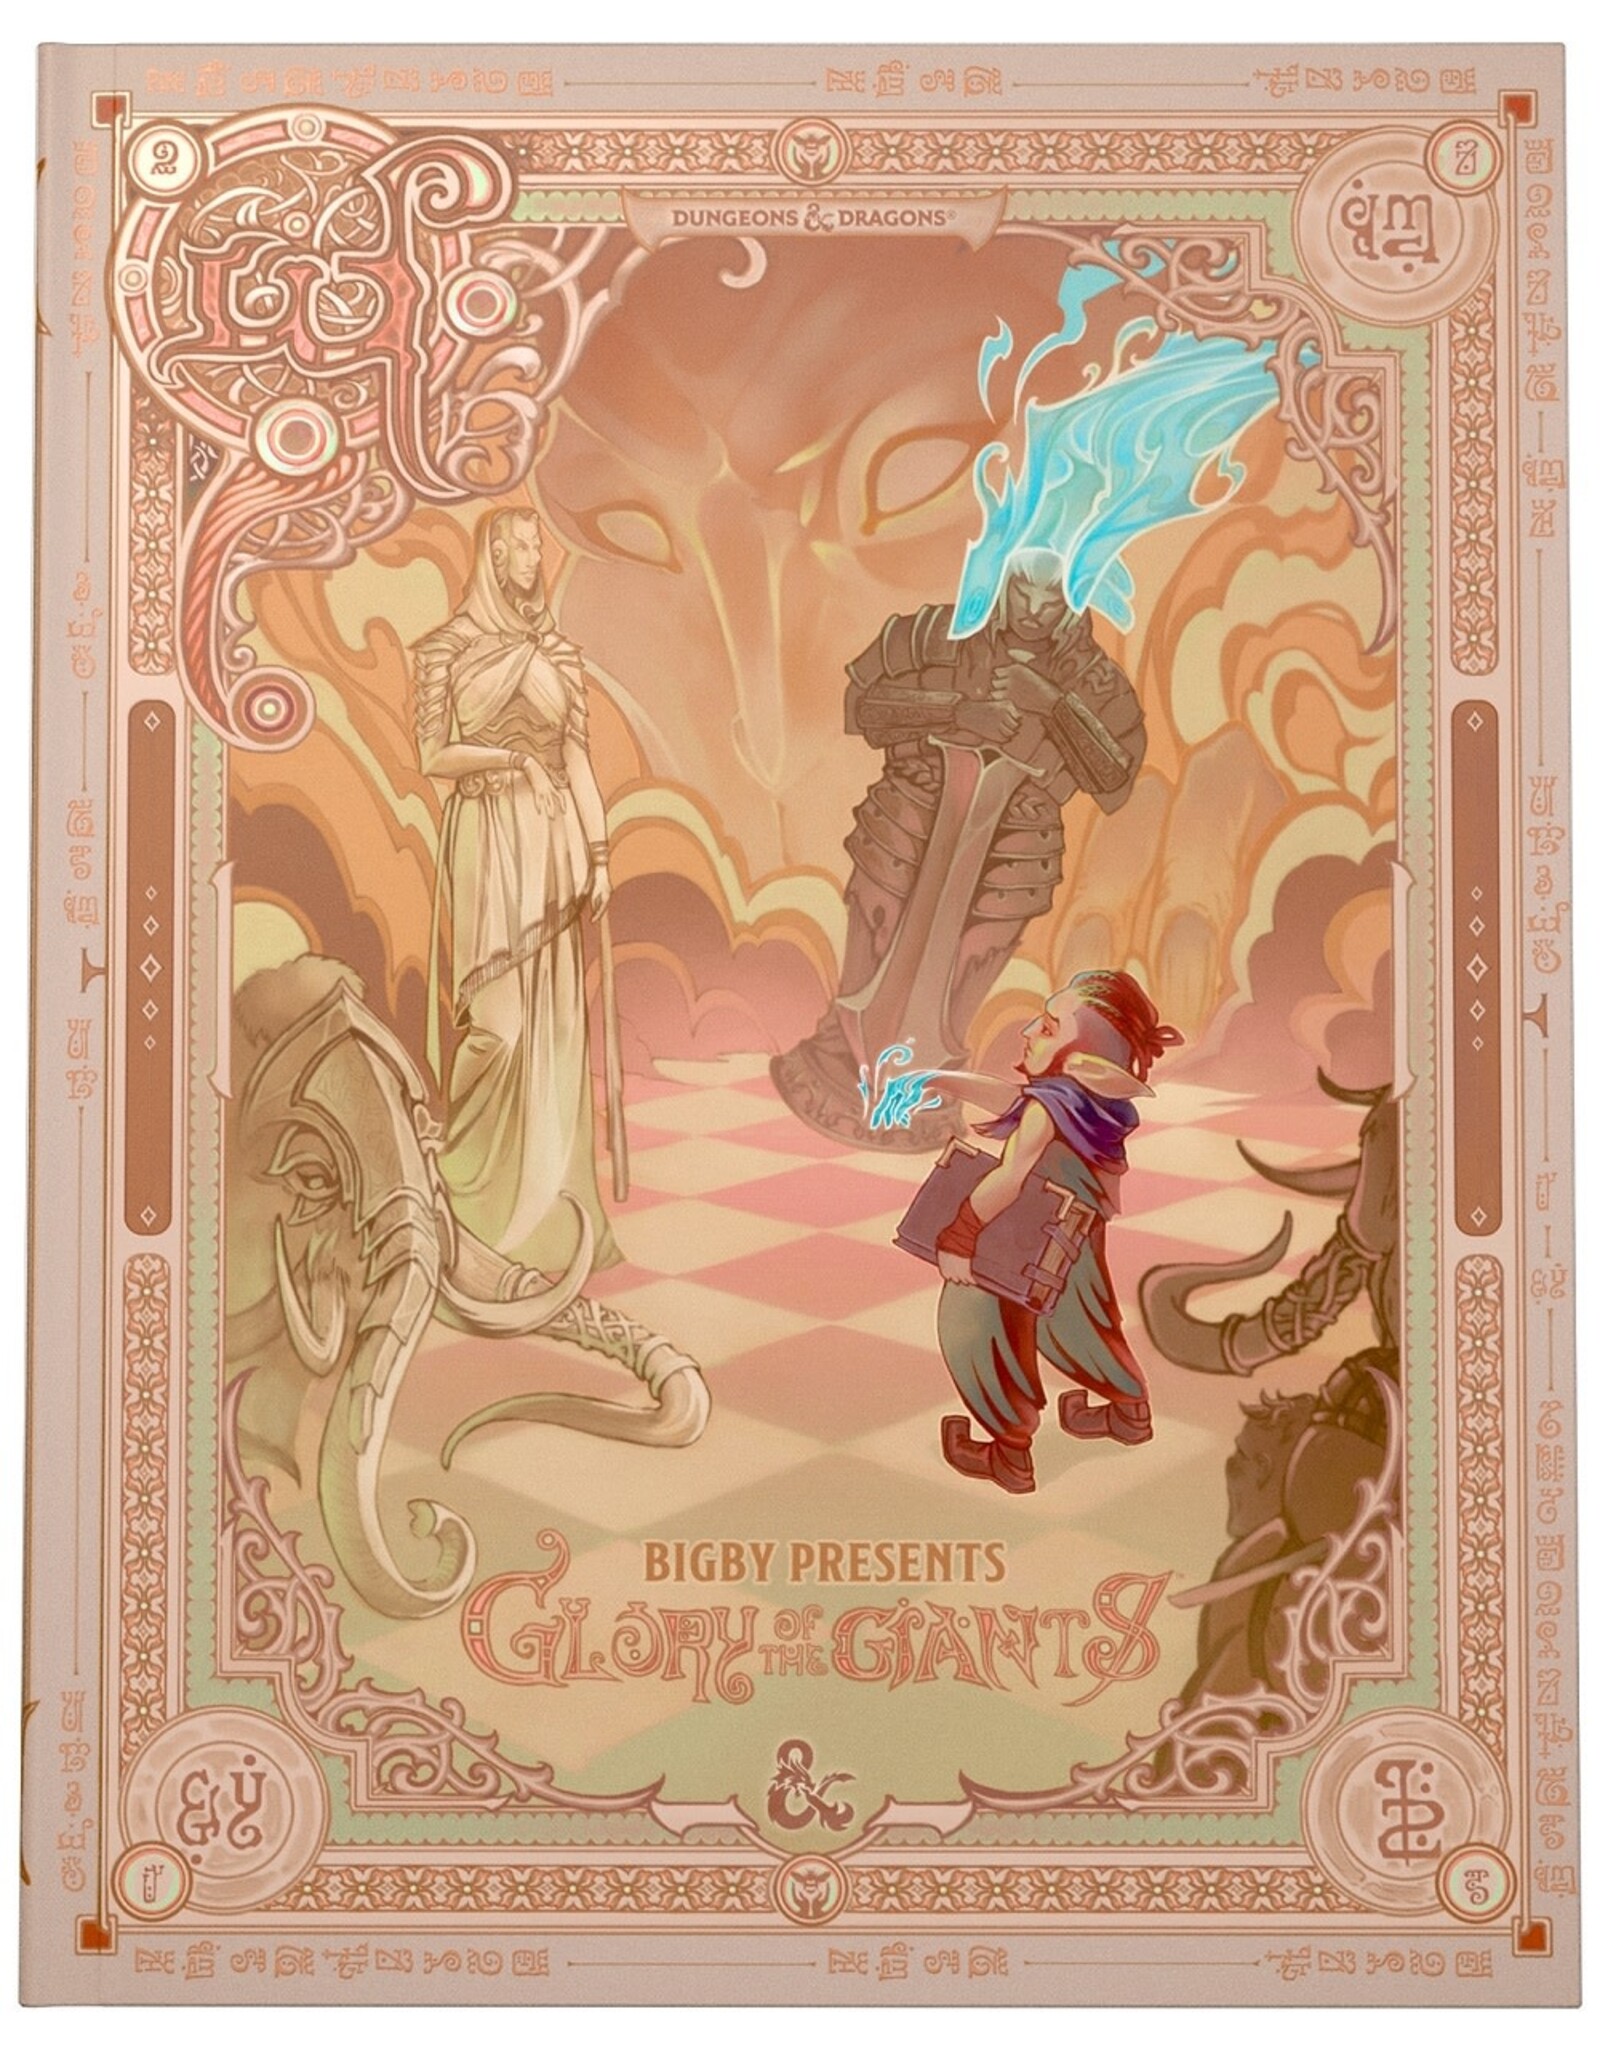 Wizards of the Coast Dungeons and Dragons Bigby Presents Glory Of Giants Alternate Art Cover